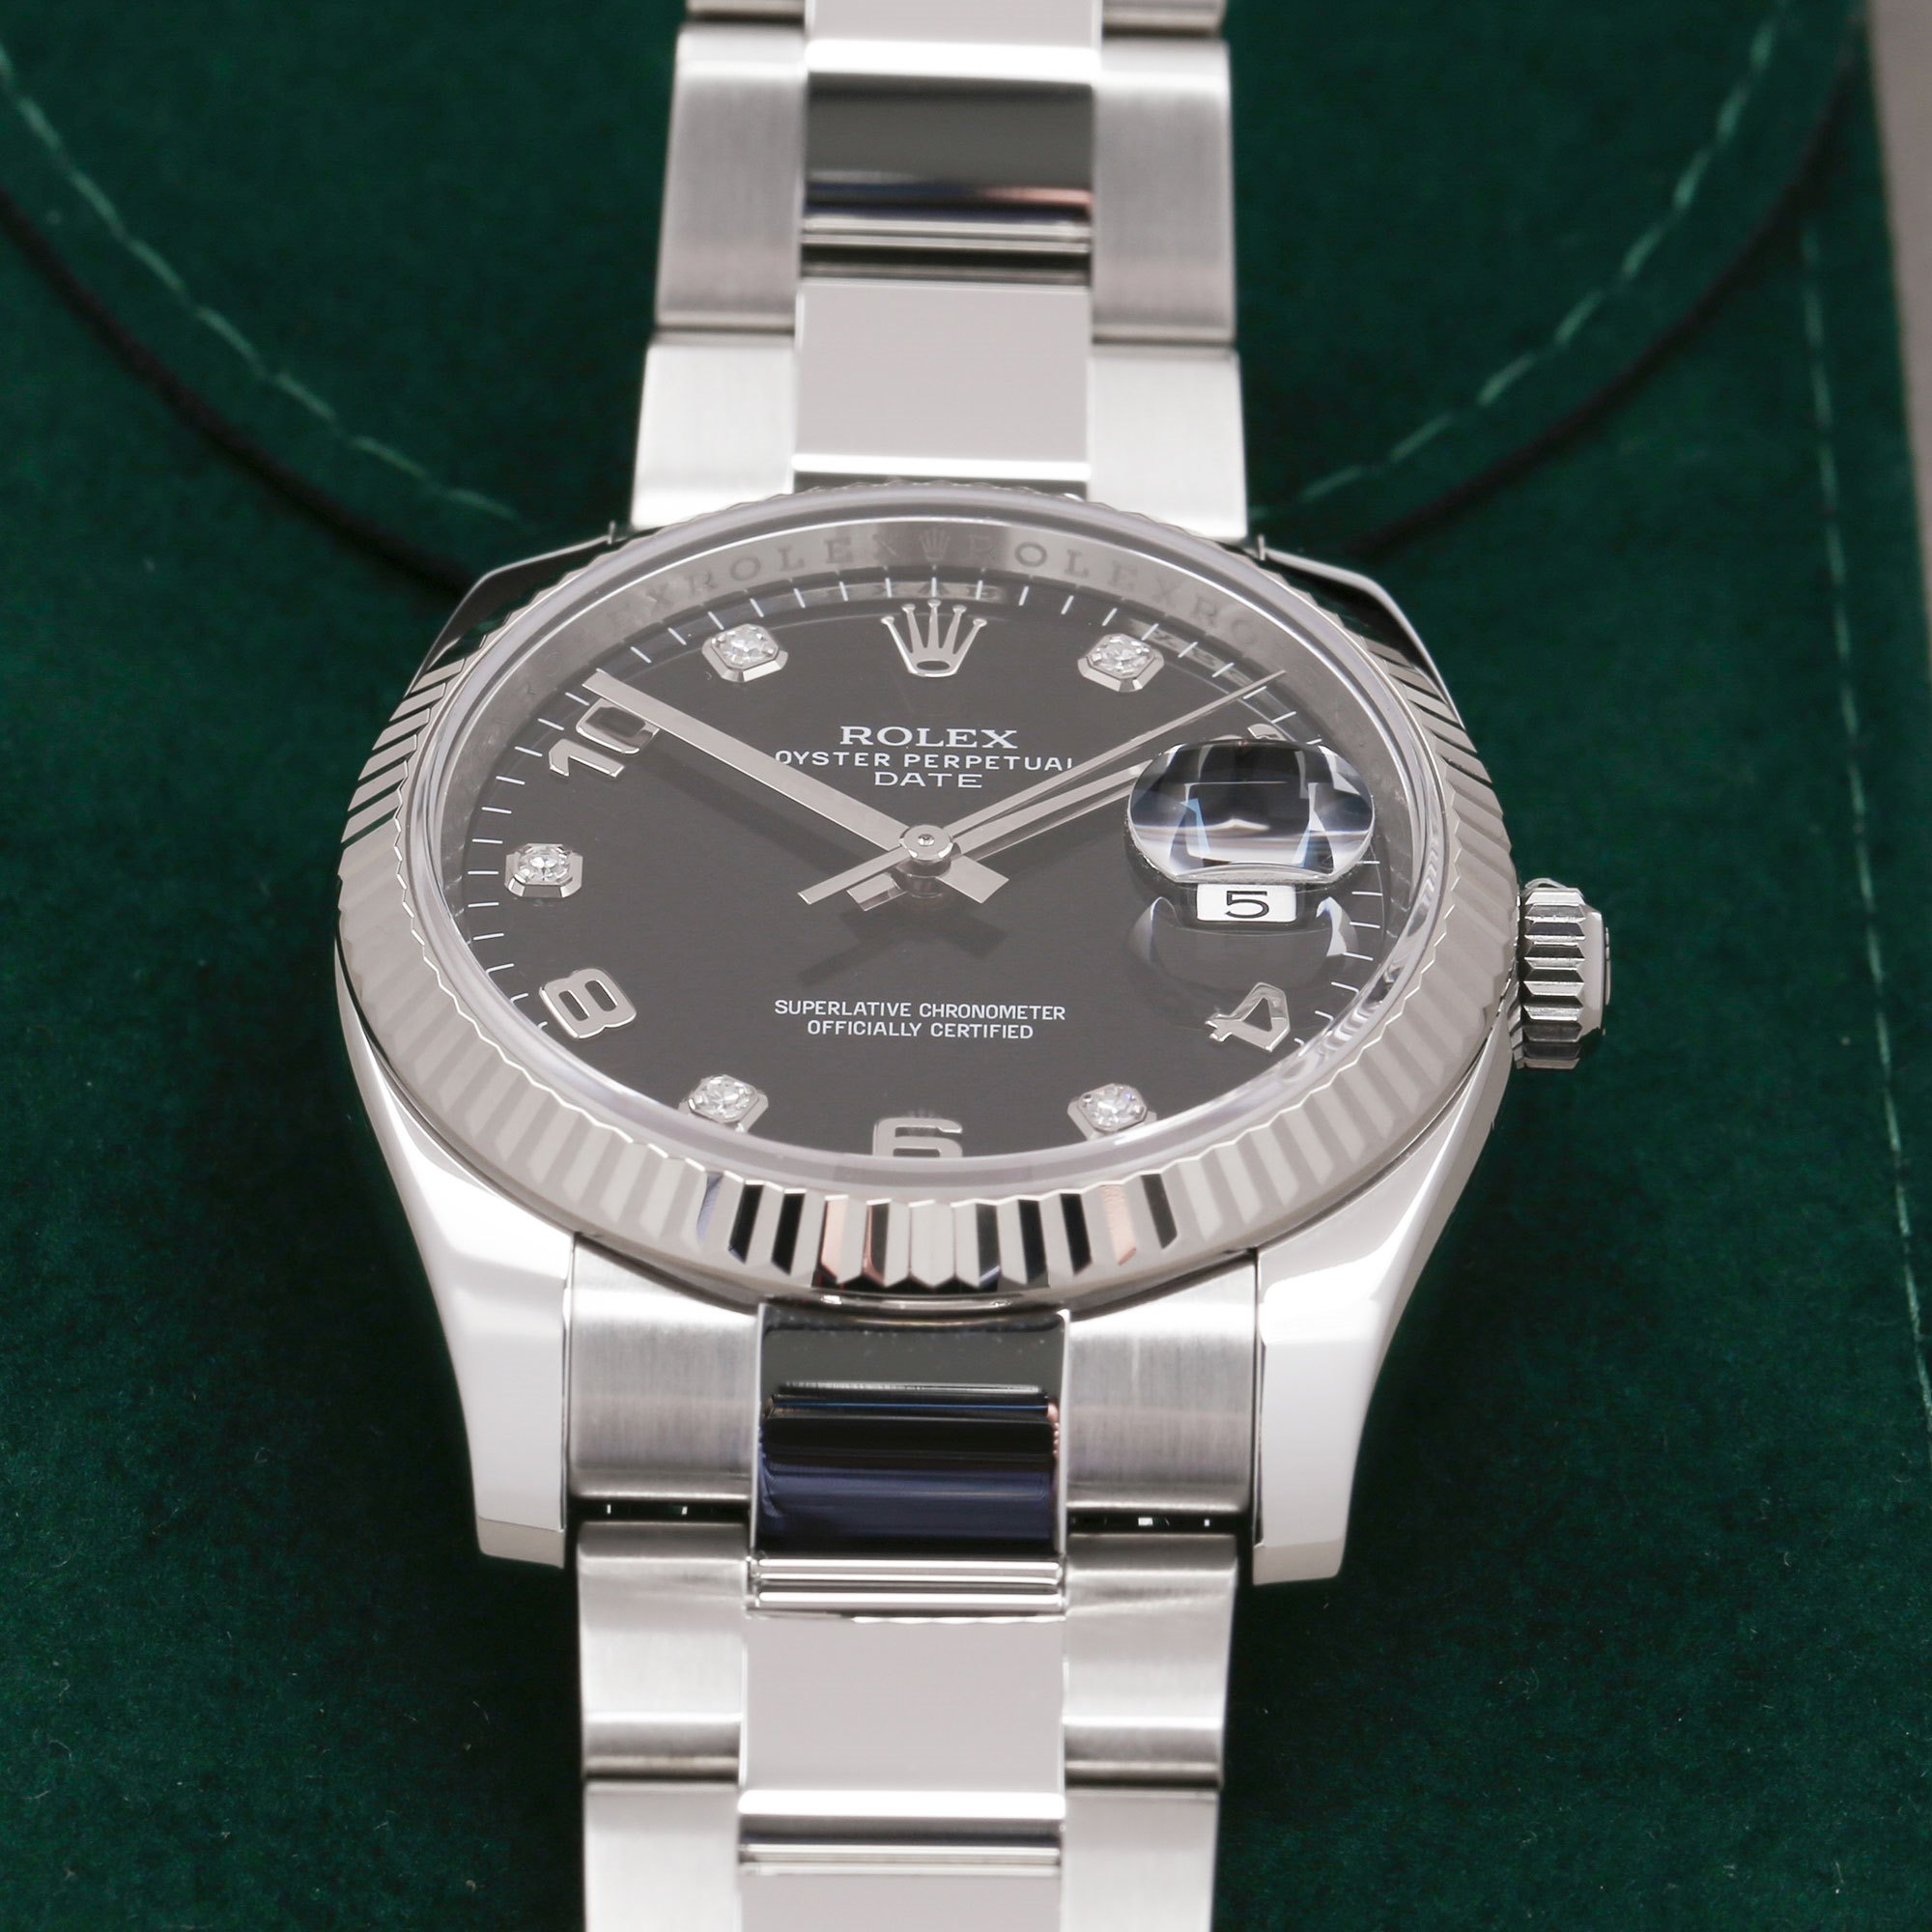 Rolex Oyster Perpetual Date Diamond Dot 18K Stainless Steel & White Gold 115234